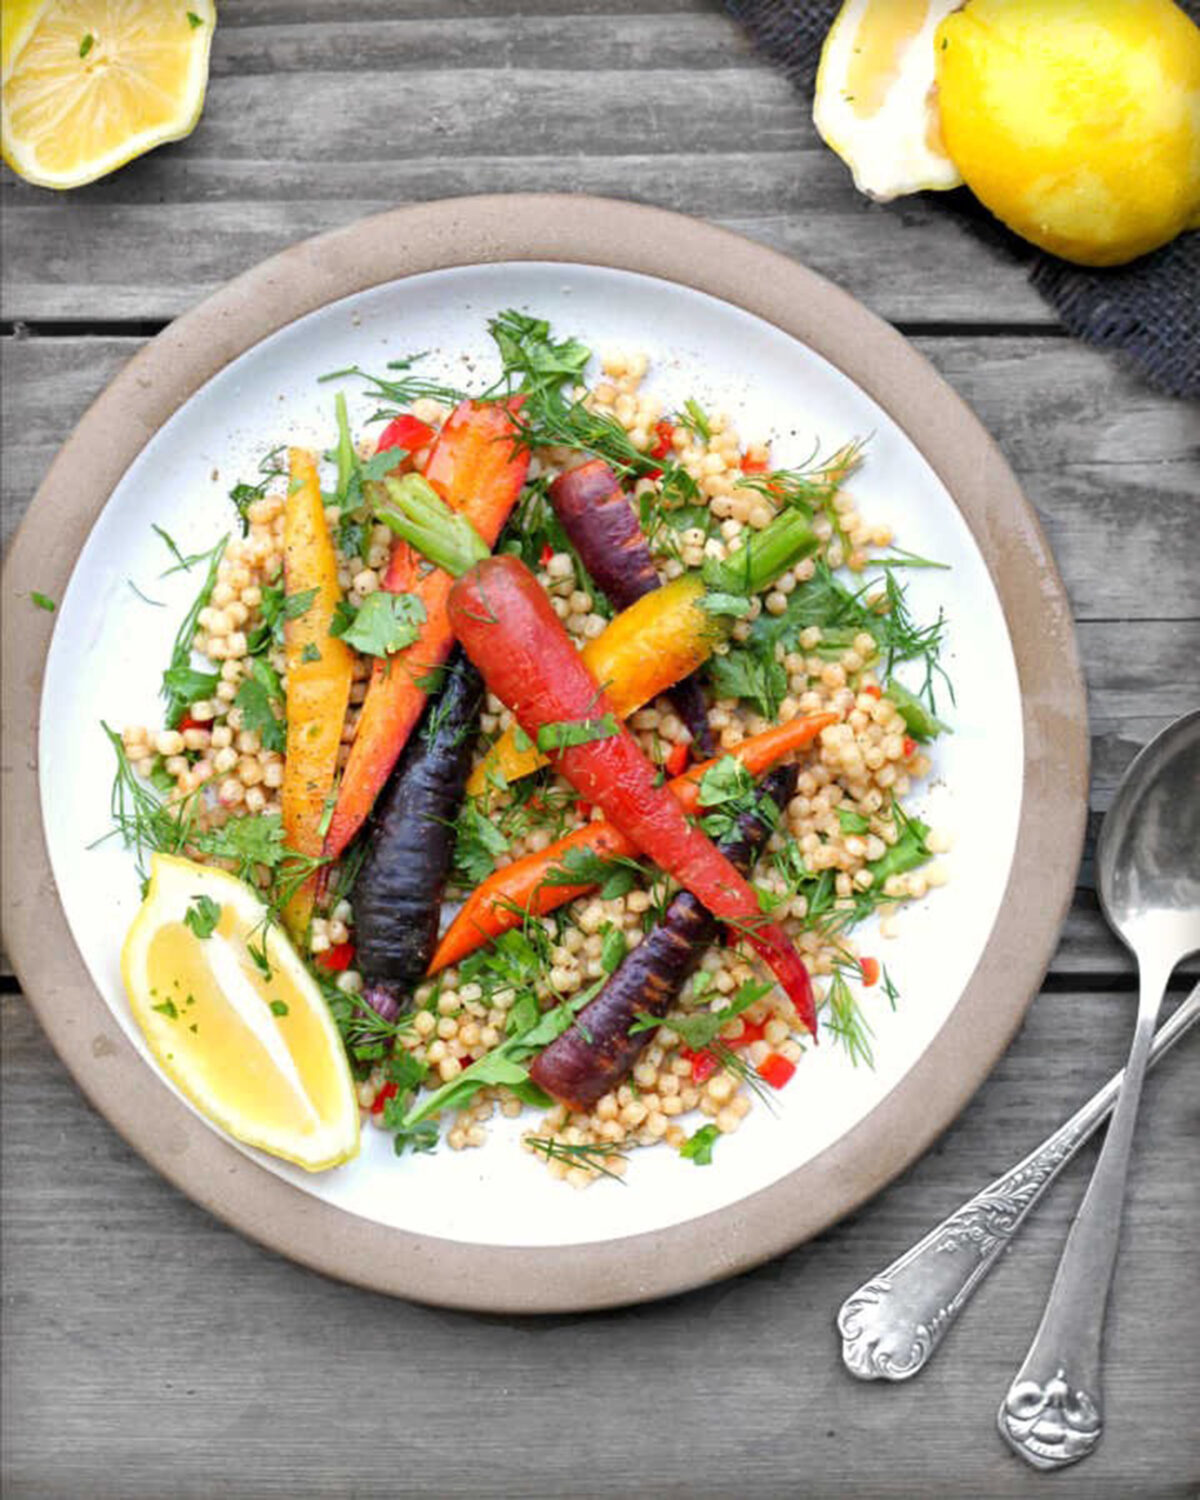 Roasted summer carrots, sweet and bright, are accompanied by frilly herbs and nutty Israeli couscous in this versatile salad. (Lynda Balslev for Tastefood)